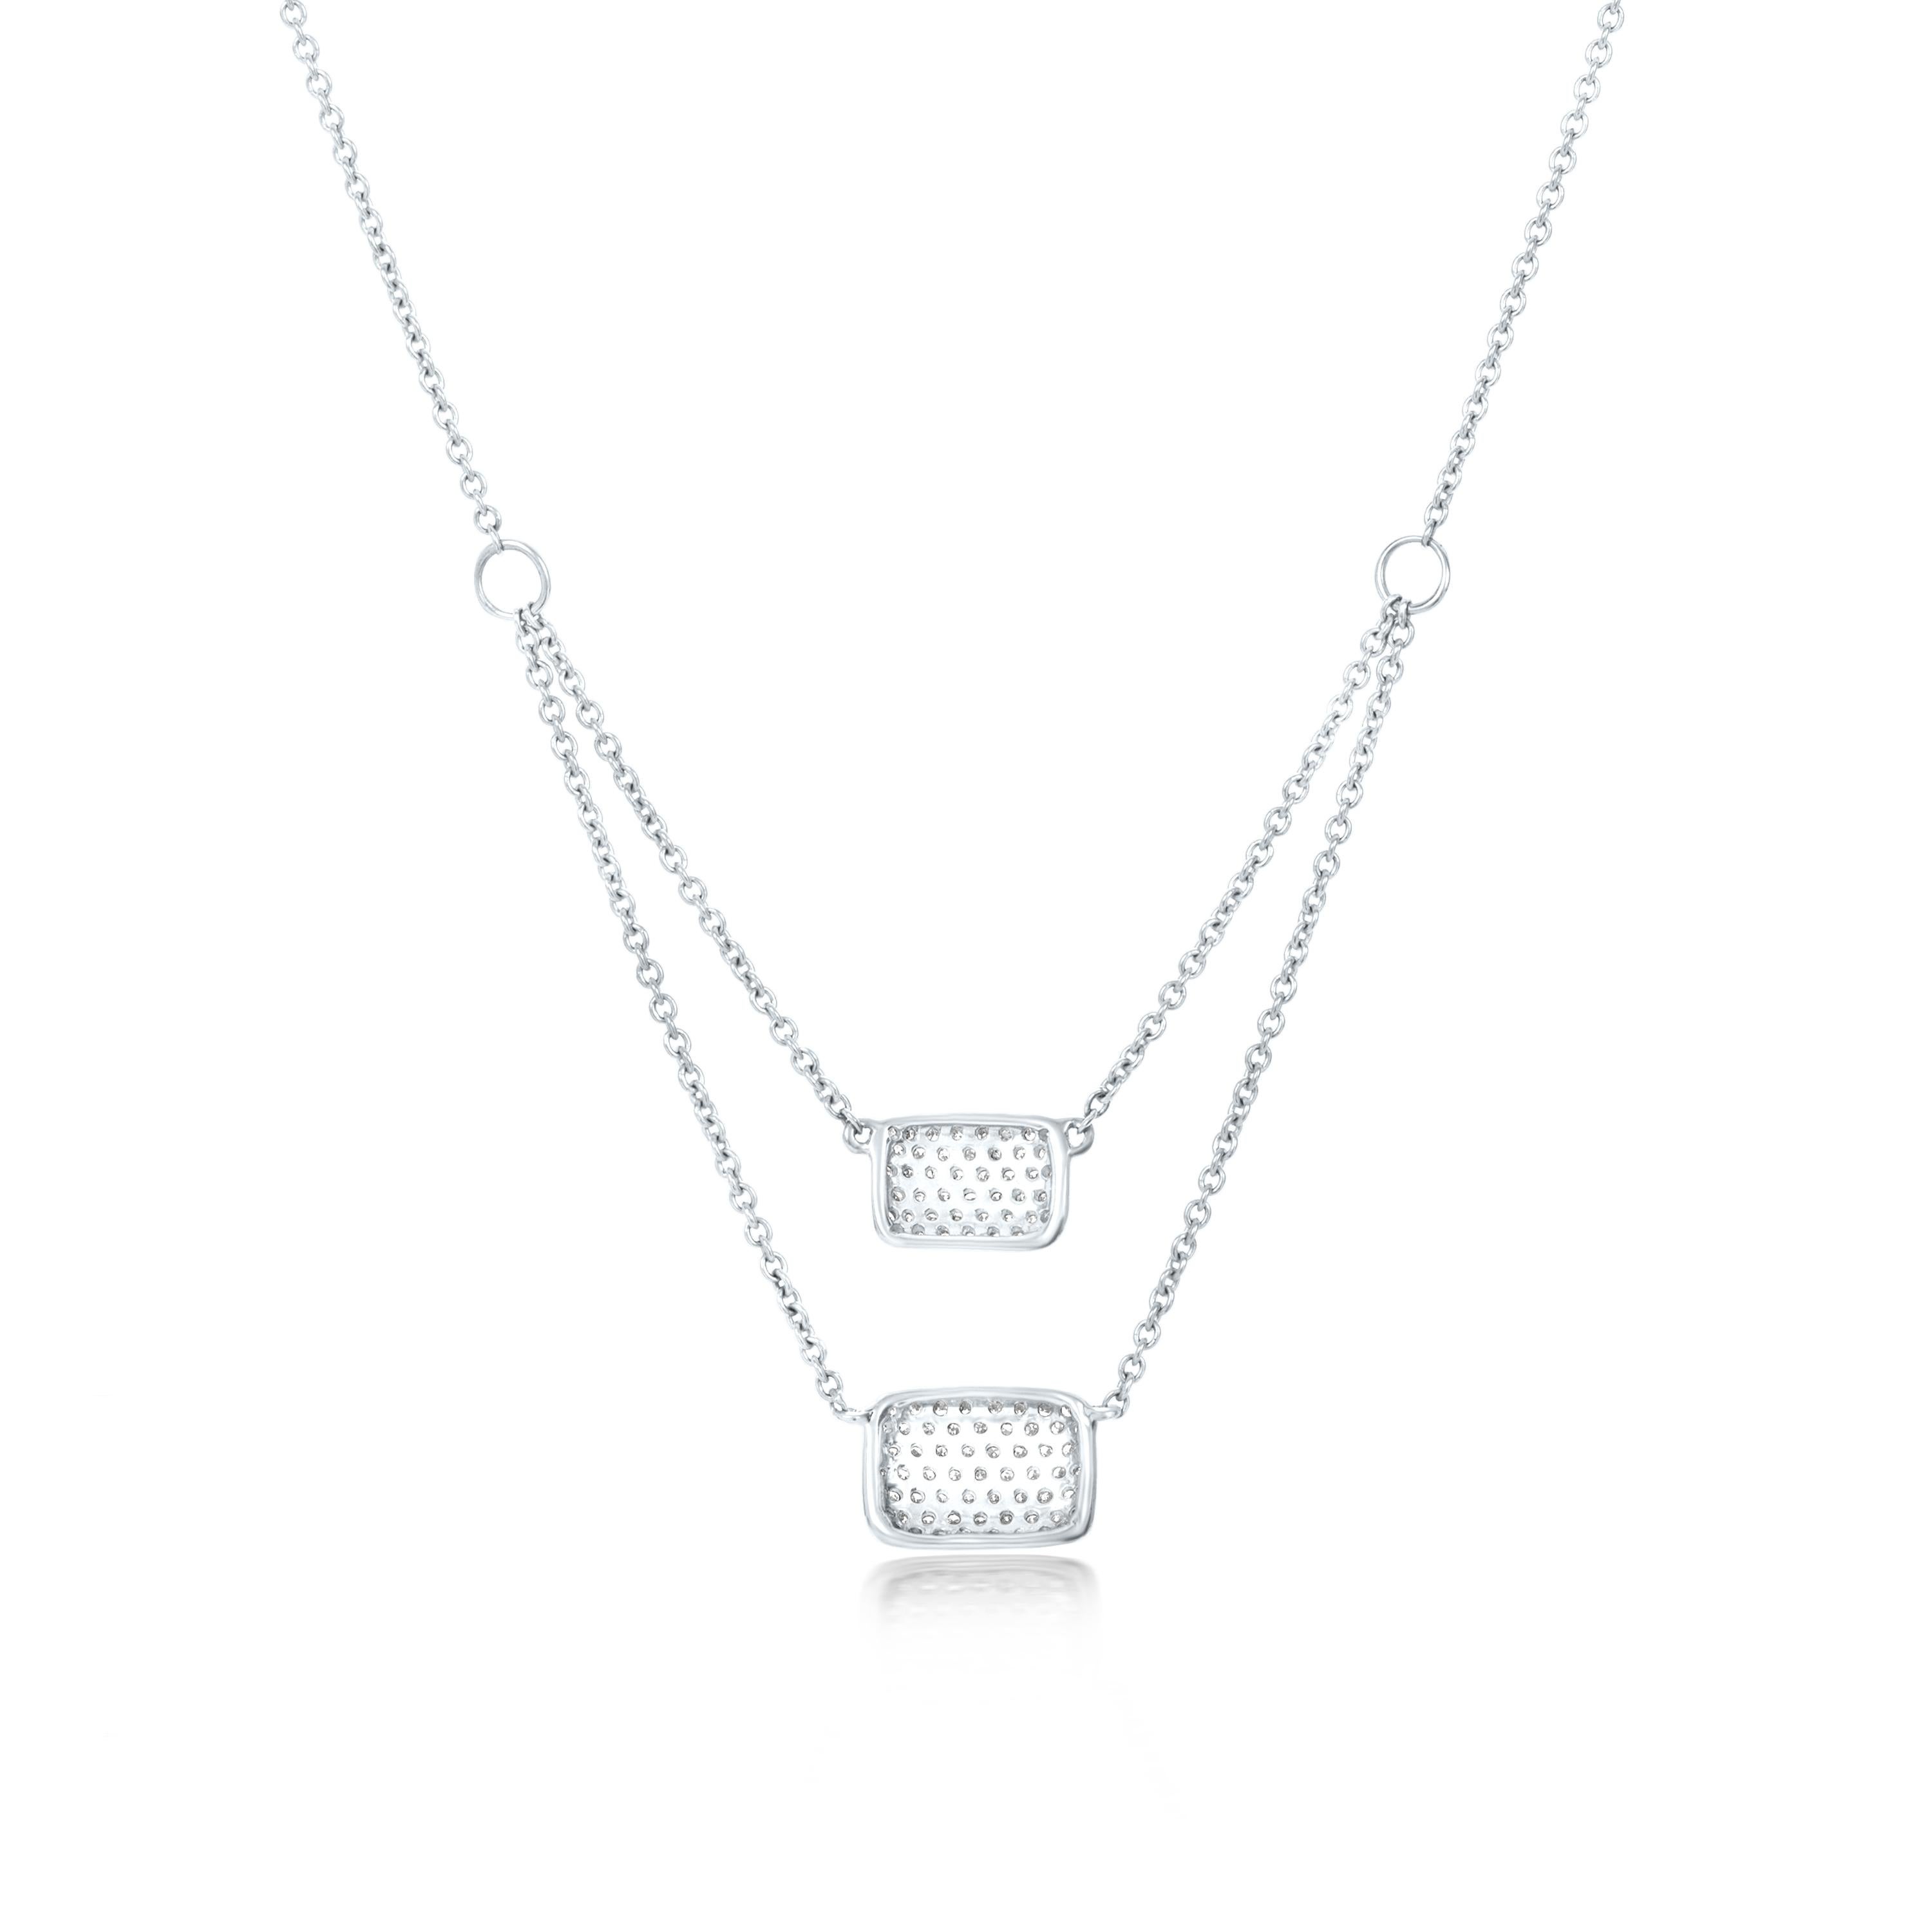 This Luxle double-Strand square cluster necklace is one of a kind, meticulously created in 14K White Gold. This necklace features 0.29 carats of round single cut diamonds that are perfectly aligned to illuminate light from every angle.
Please follow